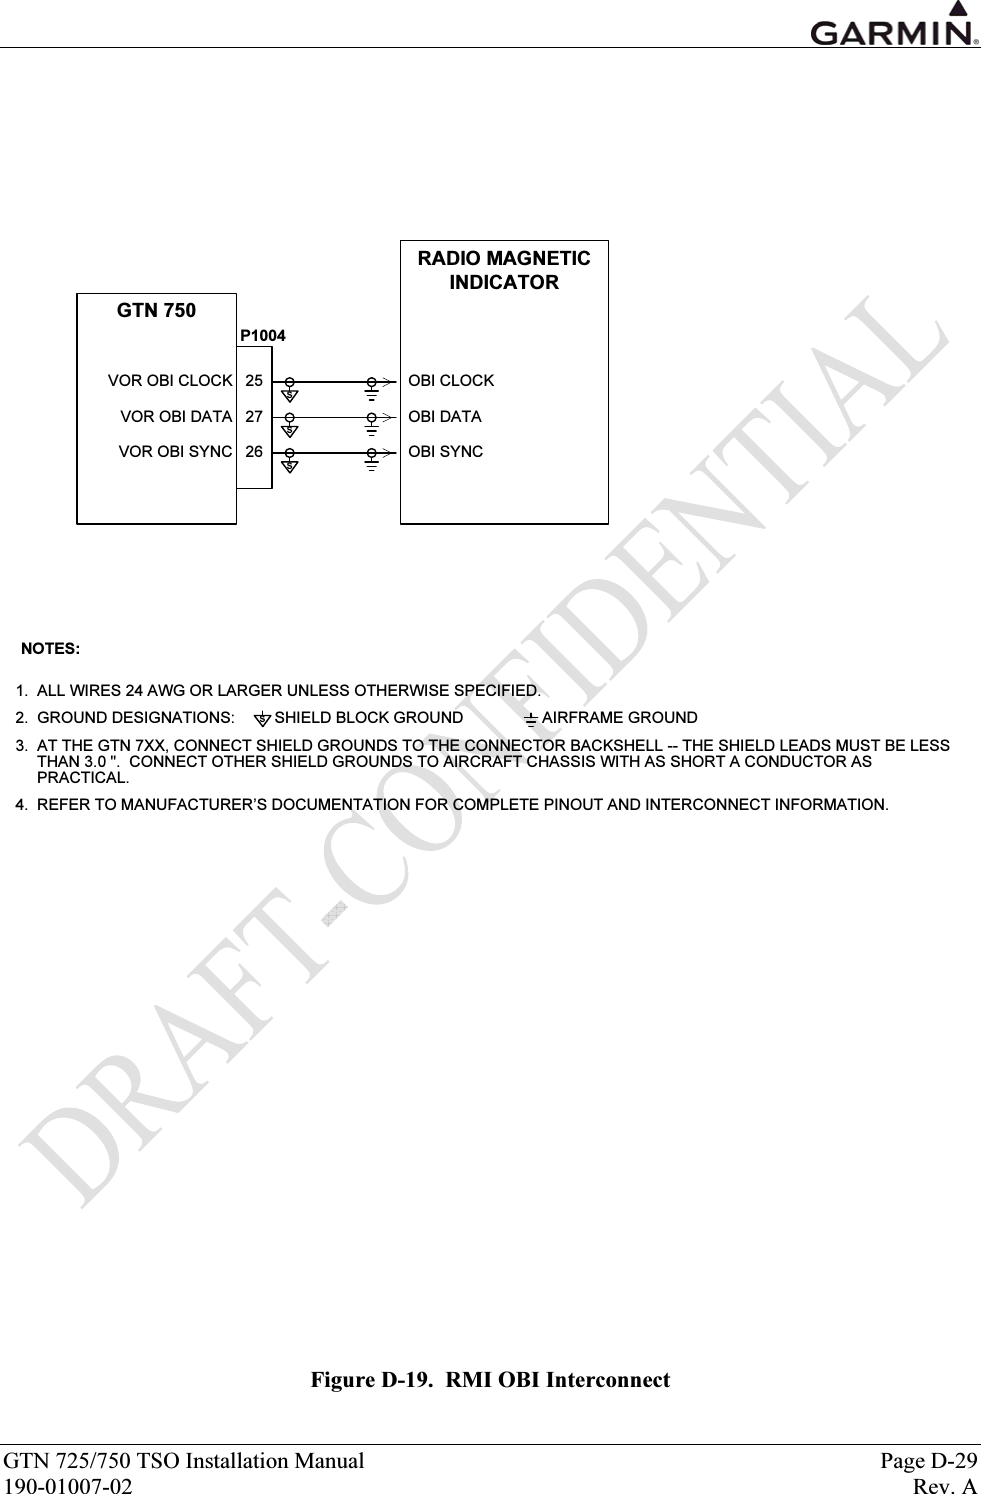  GTN 725/750 TSO Installation Manual  Page D-29 190-01007-02  Rev. A RADIO MAGNETIC INDICATOROBI SYNCOBI CLOCKOBI DATAP1004252726 VOR OBI SYNC VOR OBI DATA VOR OBI CLOCKGTN 750NOTES:1.  ALL WIRES 24 AWG OR LARGER UNLESS OTHERWISE SPECIFIED.2.  GROUND DESIGNATIONS:         SHIELD BLOCK GROUND                  AIRFRAME GROUND3.  AT THE GTN 7XX, CONNECT SHIELD GROUNDS TO THE CONNECTOR BACKSHELL -- THE SHIELD LEADS MUST BE LESS THAN 3.0 &quot;.  CONNECT OTHER SHIELD GROUNDS TO AIRCRAFT CHASSIS WITH AS SHORT A CONDUCTOR AS PRACTICAL. 4. REFER TO MANUFACTURER’S DOCUMENTATION FOR COMPLETE PINOUT AND INTERCONNECT INFORMATION. ssss Figure D-19.  RMI OBI Interconnect 